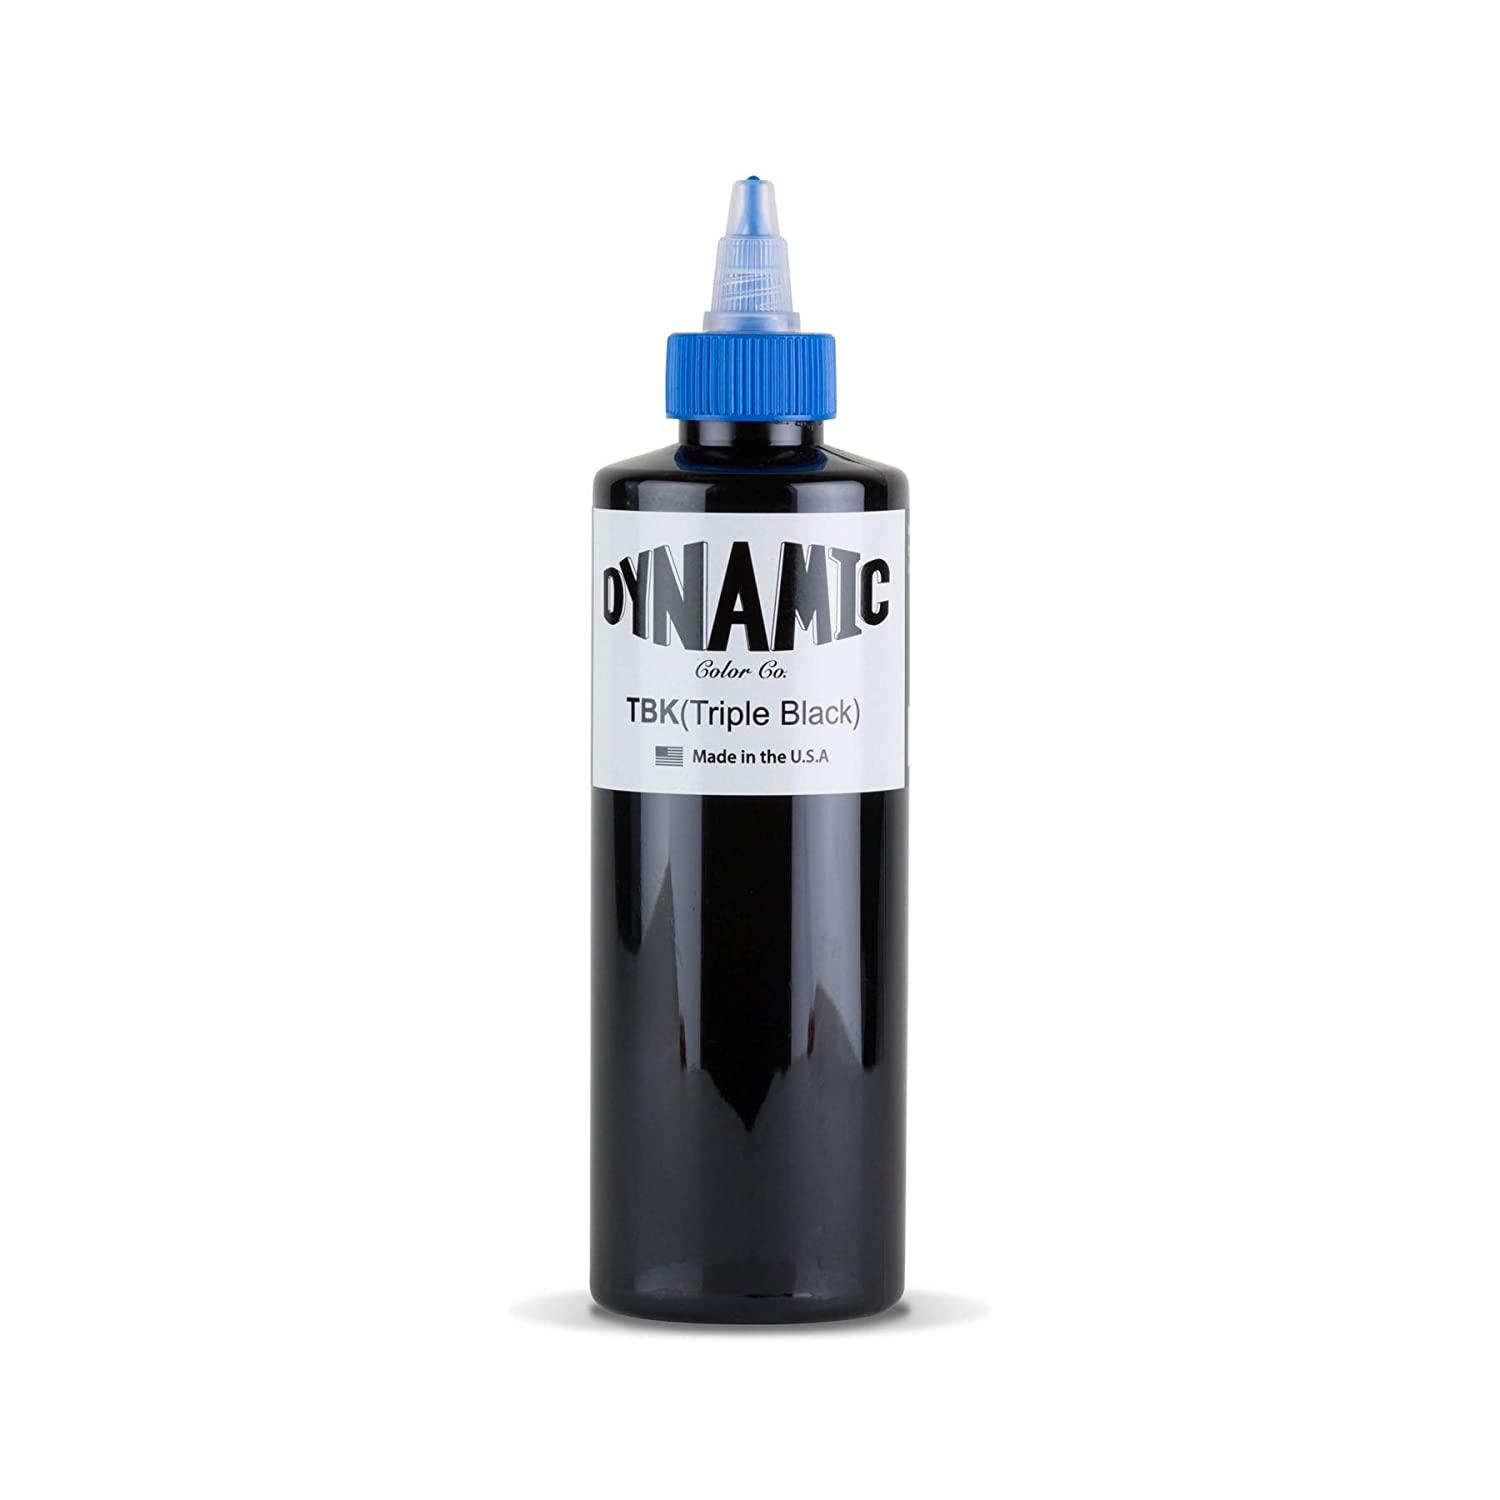 Dynamic Ink - Triple Black - tattoo numbing aftercare cream | Toochi